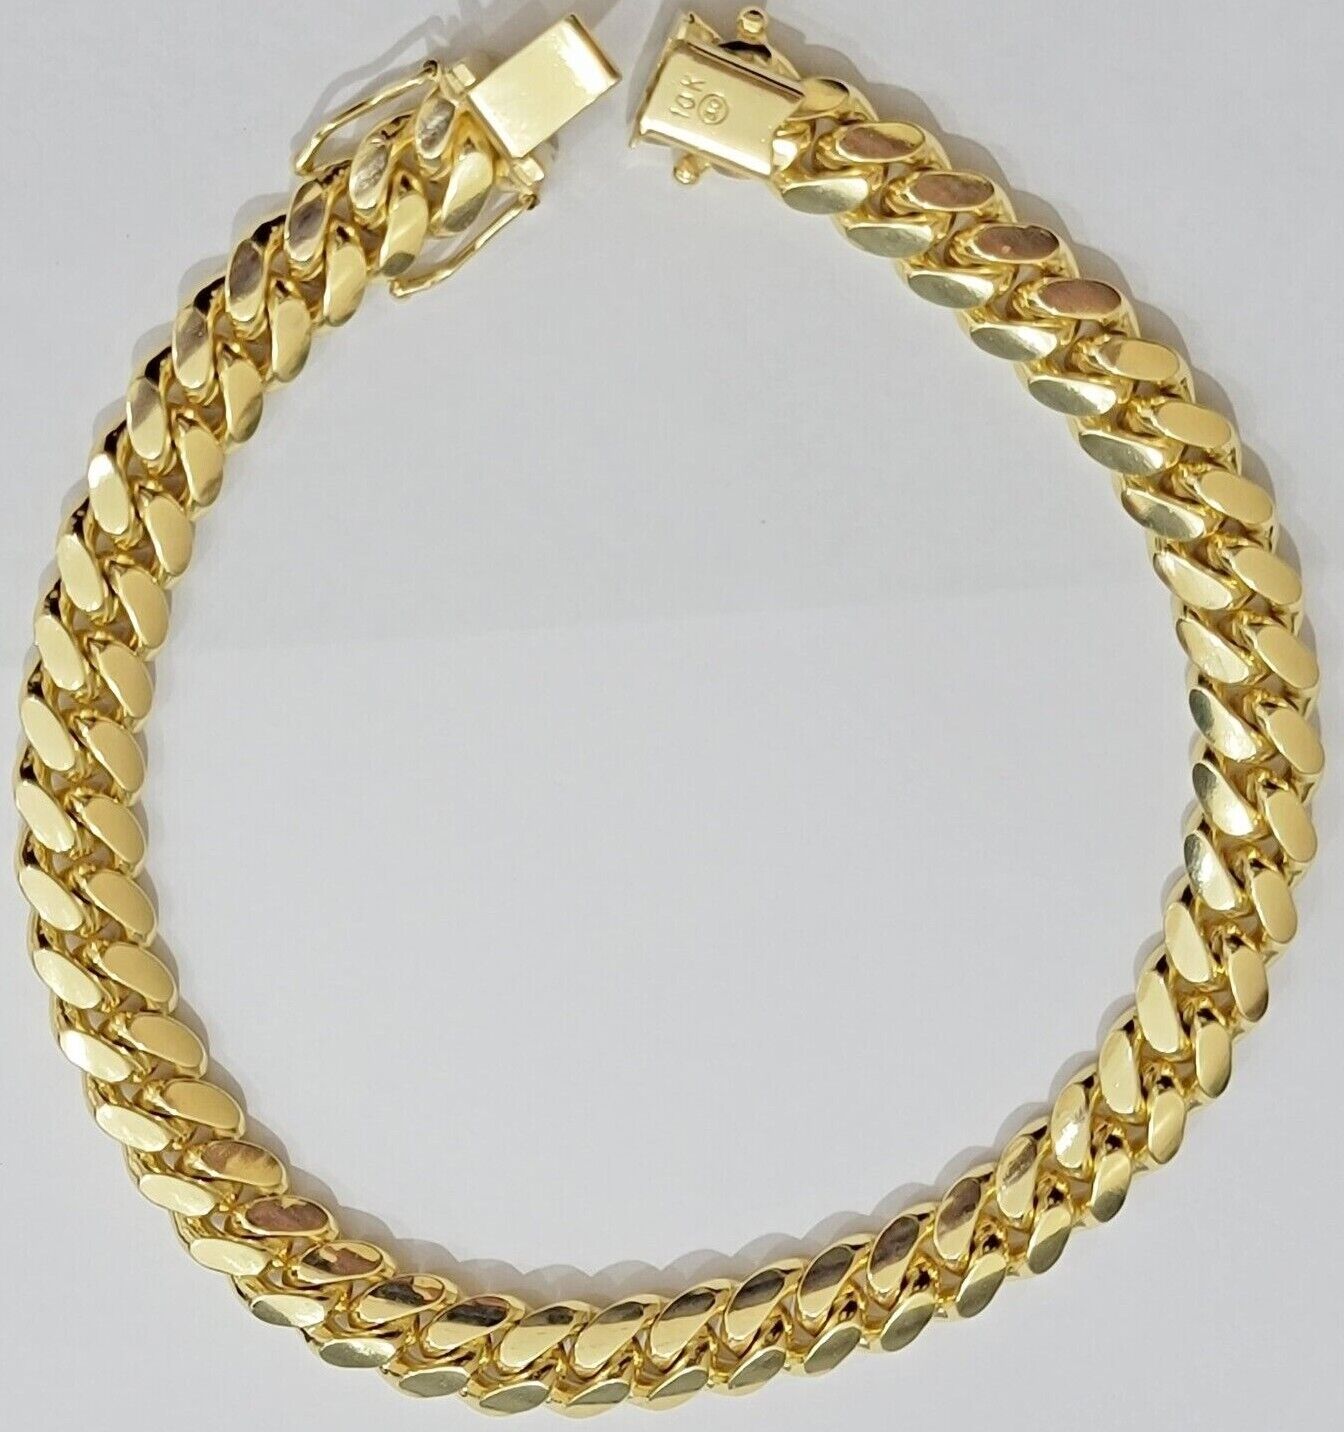 Solid 10k Gold Bracelet 8mm Miami Cuban Link 9" Inch Box Clasp SOLID LINKS, Mens